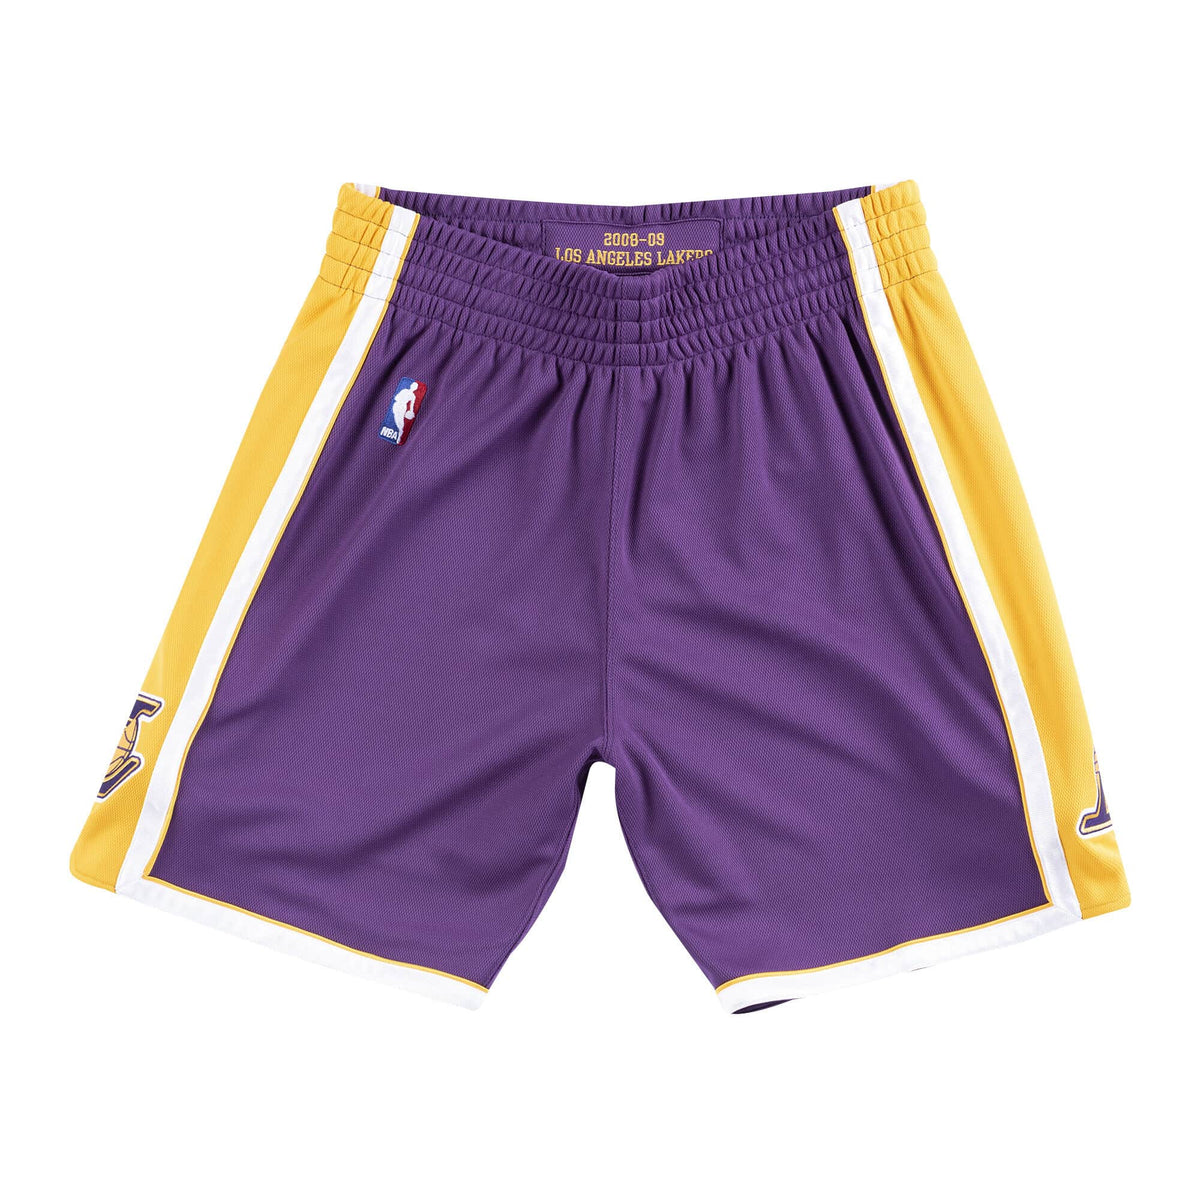 Mitchell & Ness Authentic Shorts Los Angeles Lakers Road 2008-09